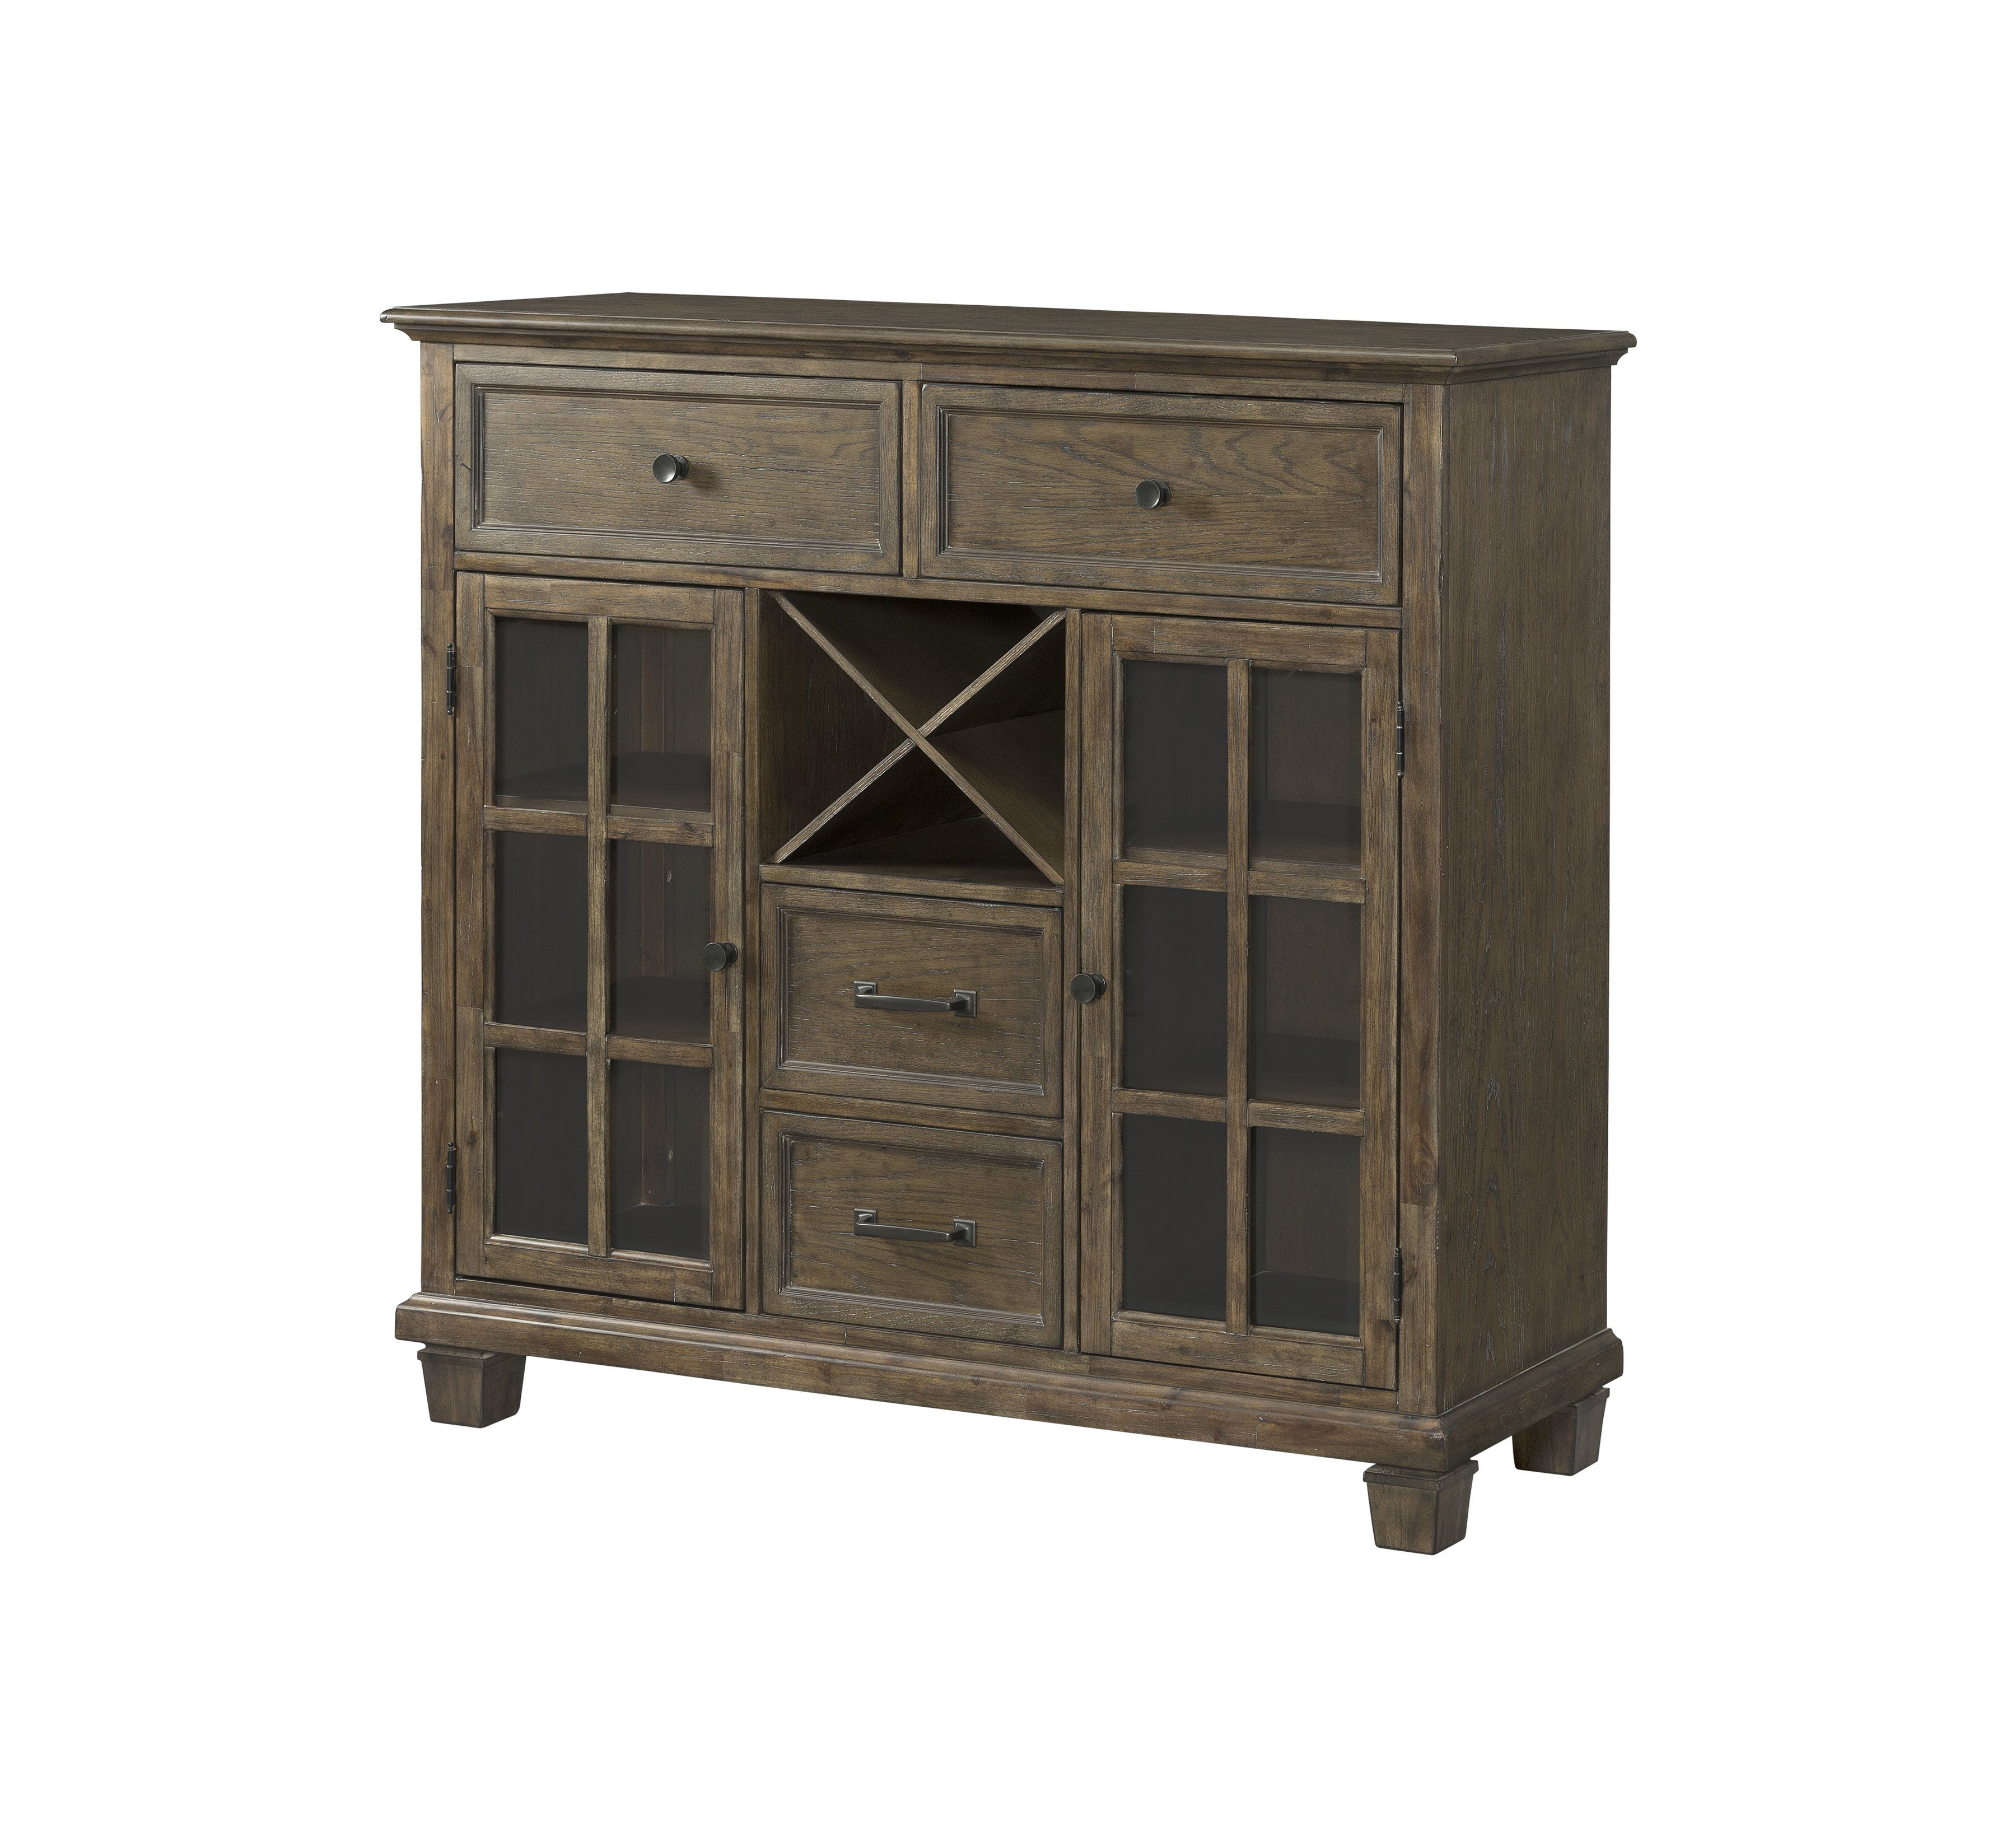 Schweitzer Sideboard Pertaining To Most Recently Released Perez Sideboards (View 7 of 20)